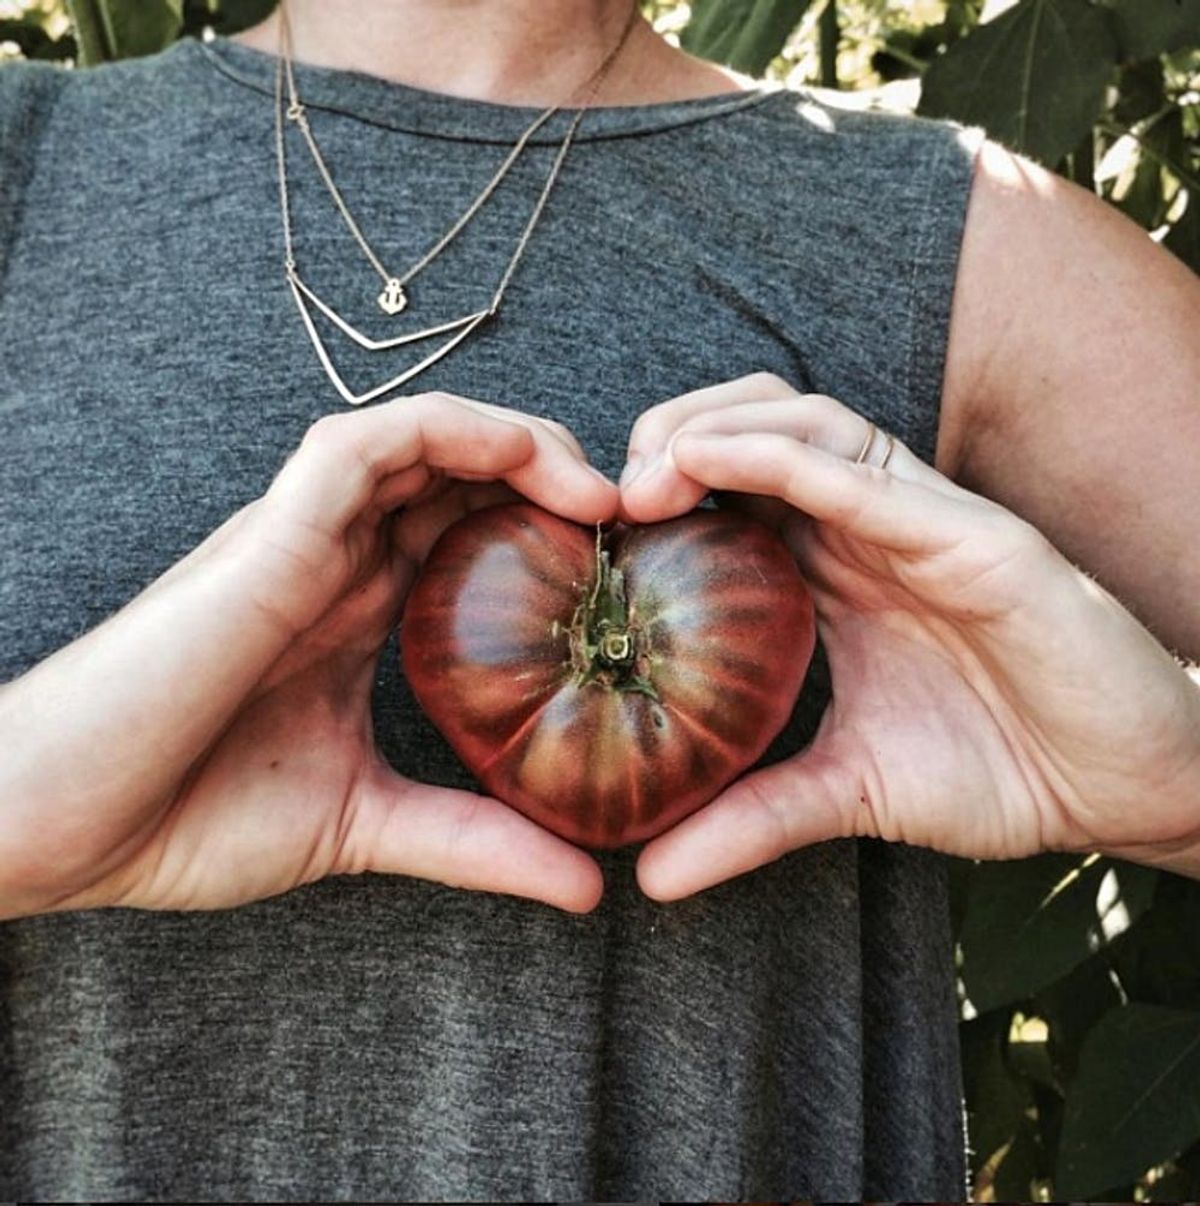 10 Urban Gardeners You Should Follow on Instagram Right Now